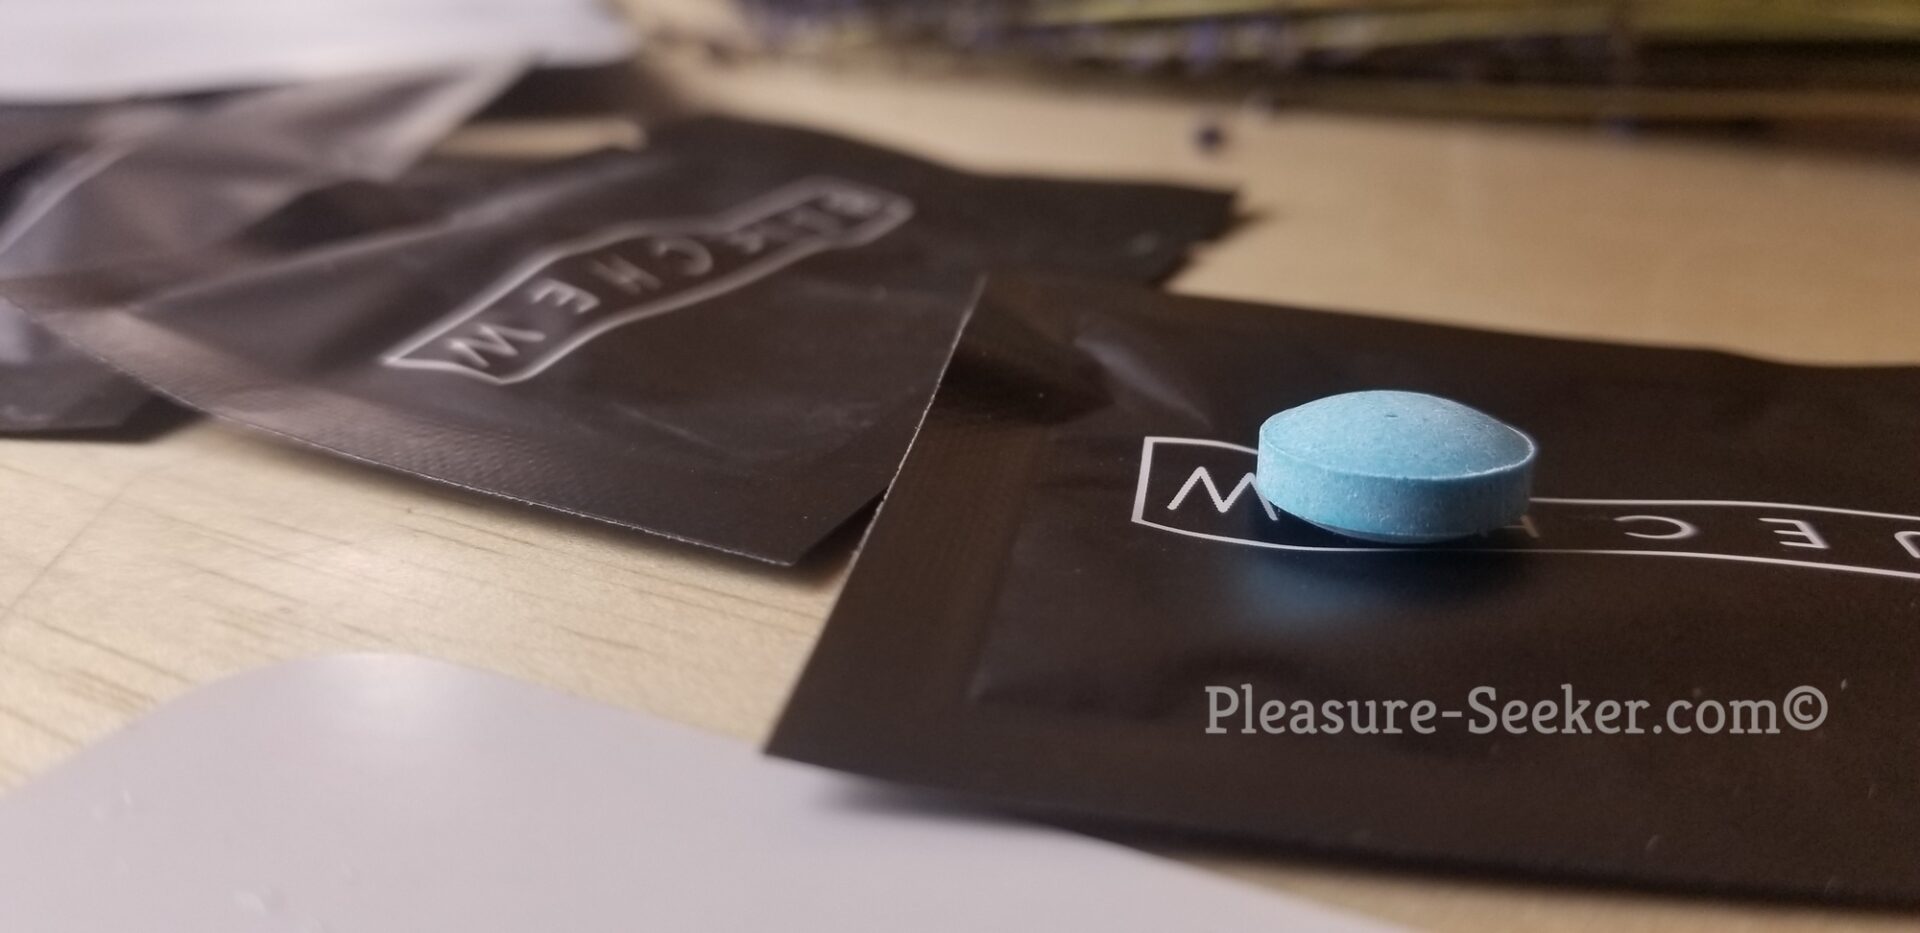 Viagra Pussy Effect - Does Bluechew Work? My Bluechew Review and Results (Plus Some Coupons)